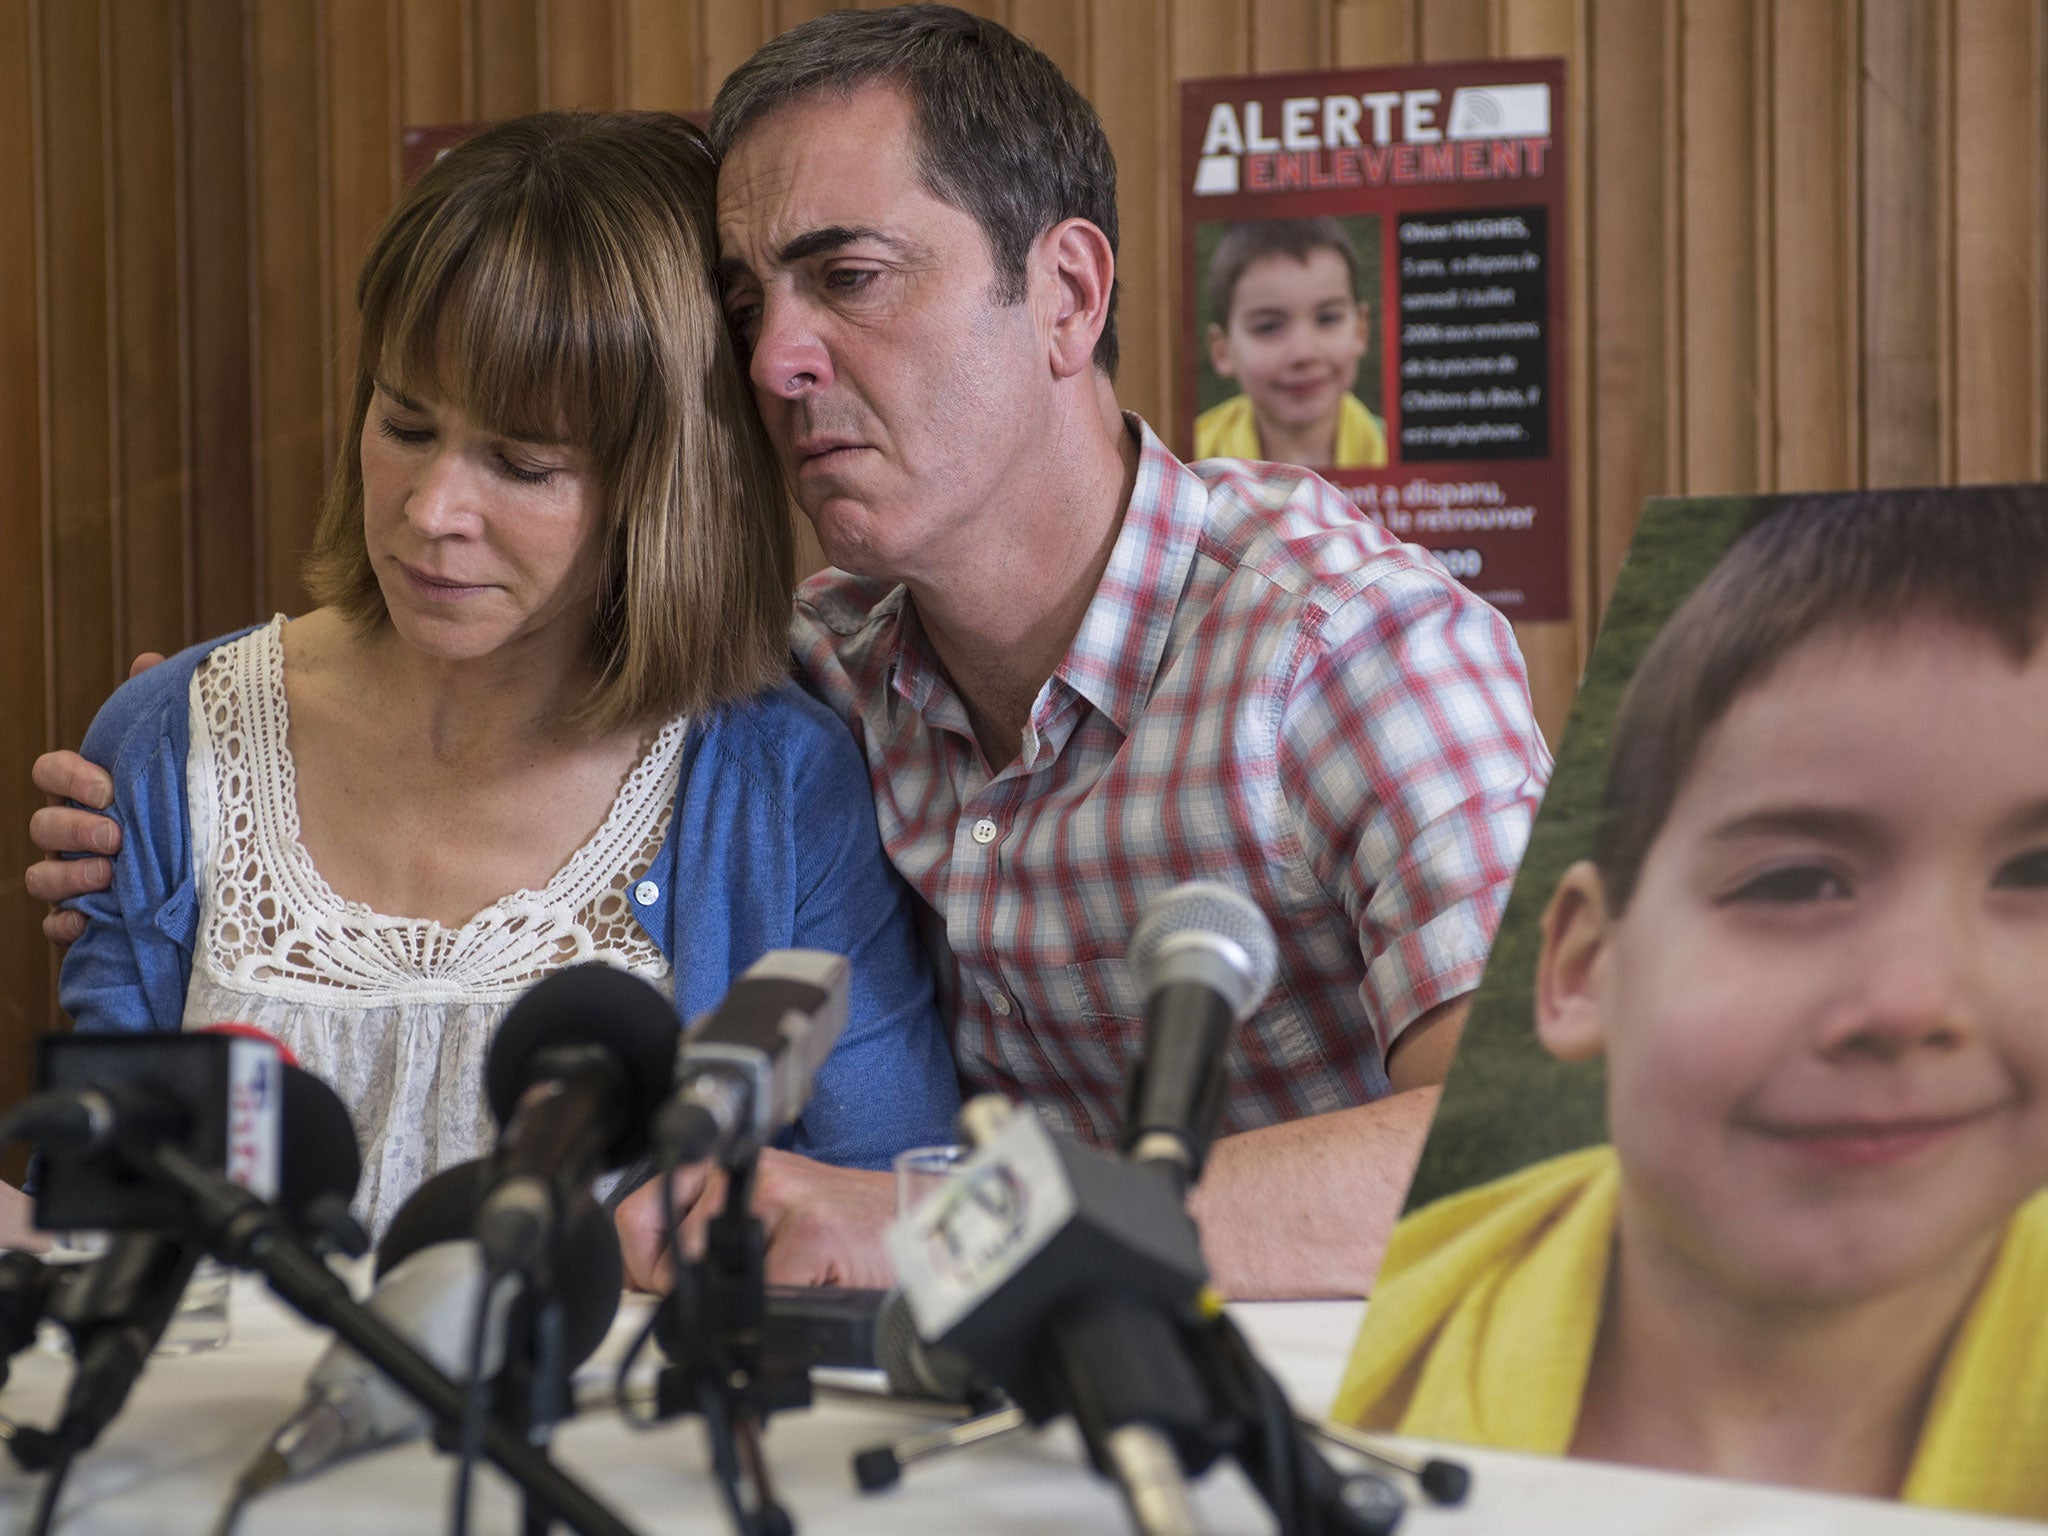 Frances O'Connor and James Nesbitt star as Emily and Tony in new BBC drama The Missing